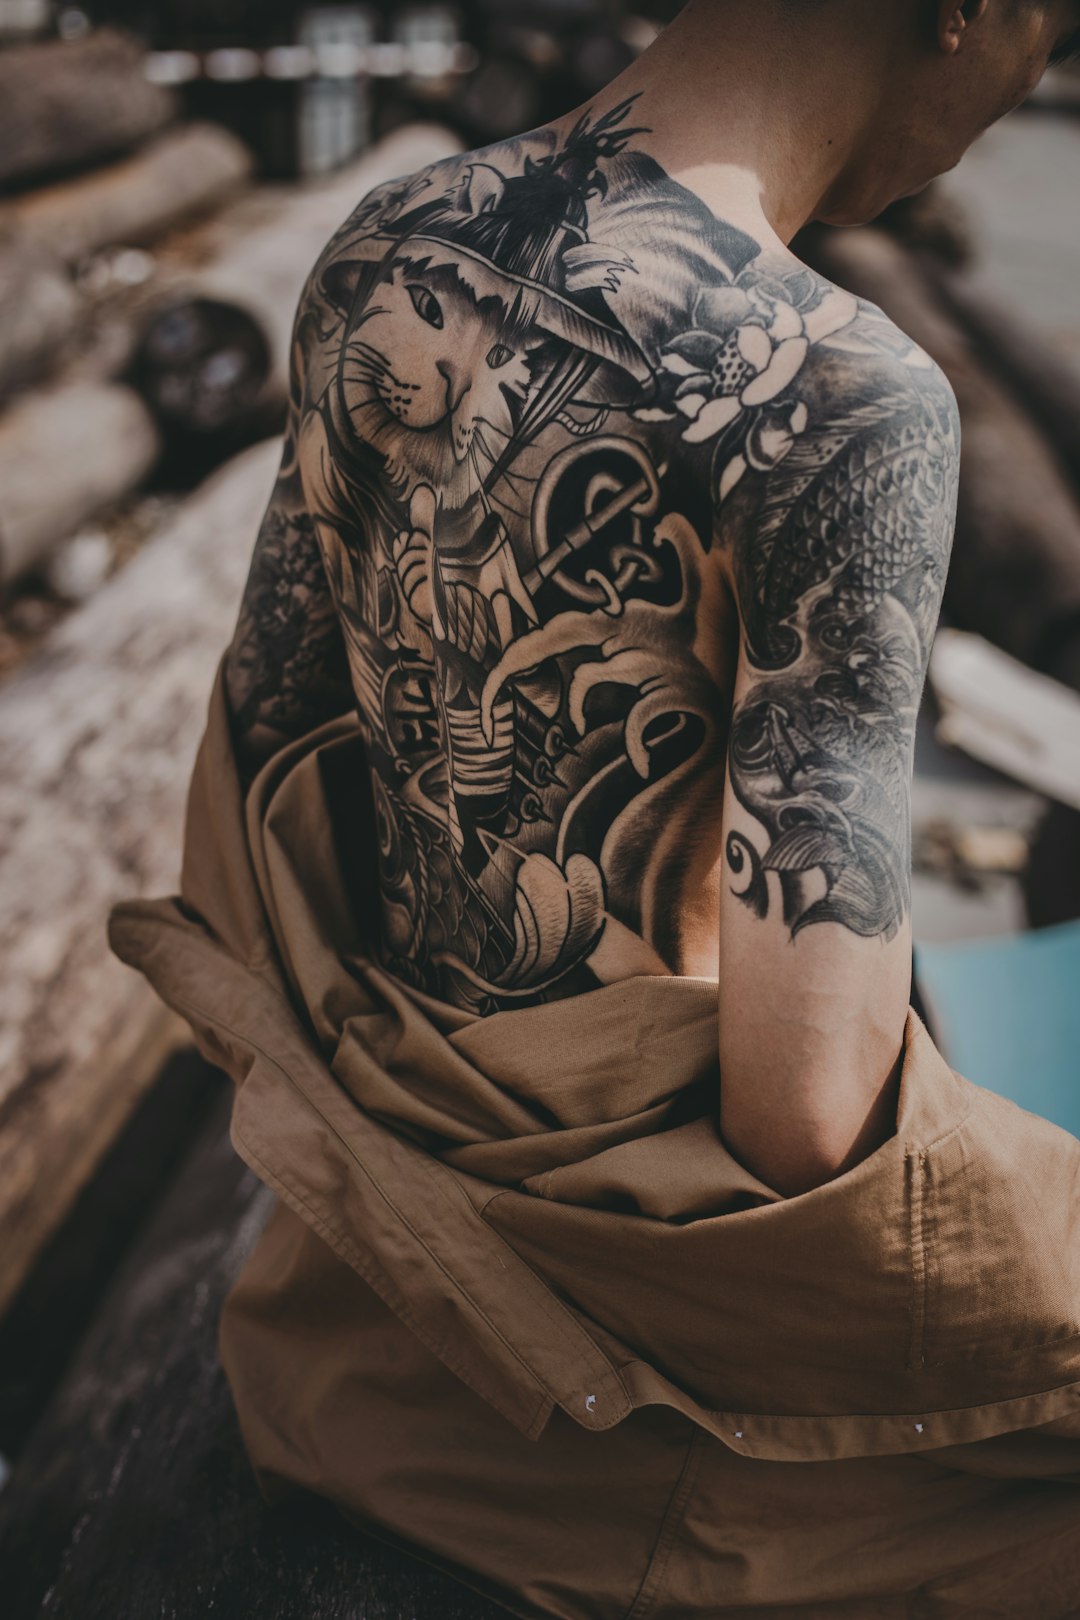 Finding the Right Tattoo Artist: Tips and Considerations